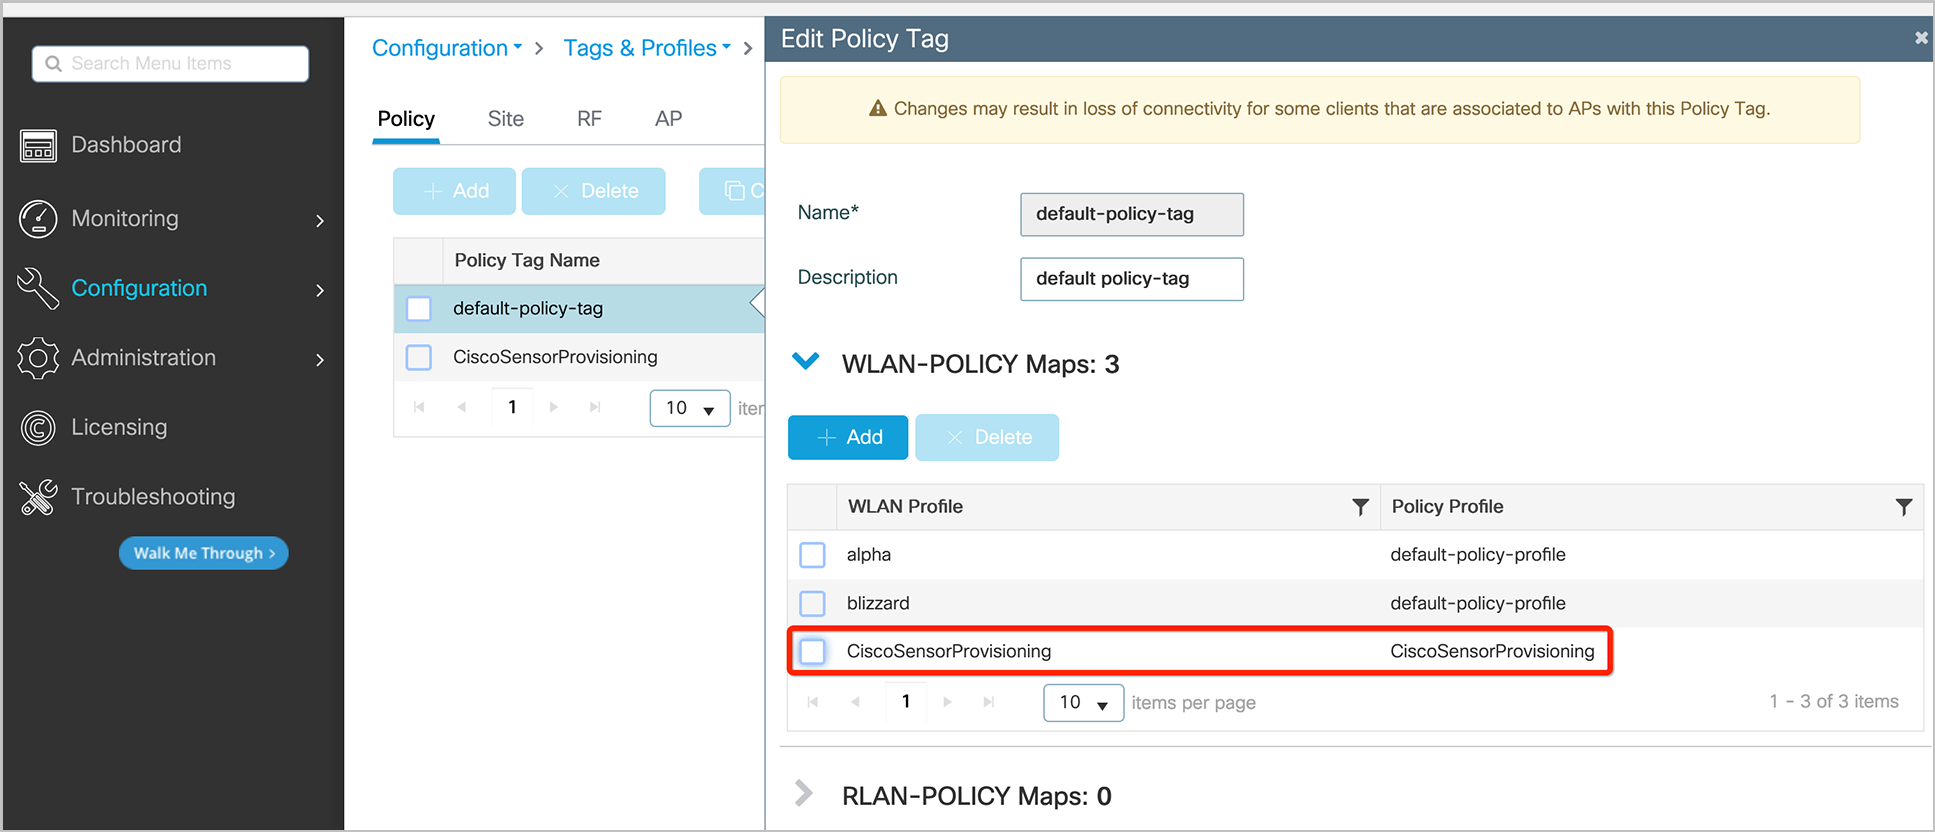 Adding the policy tag to the CiscoSensorProvisioning policy profile